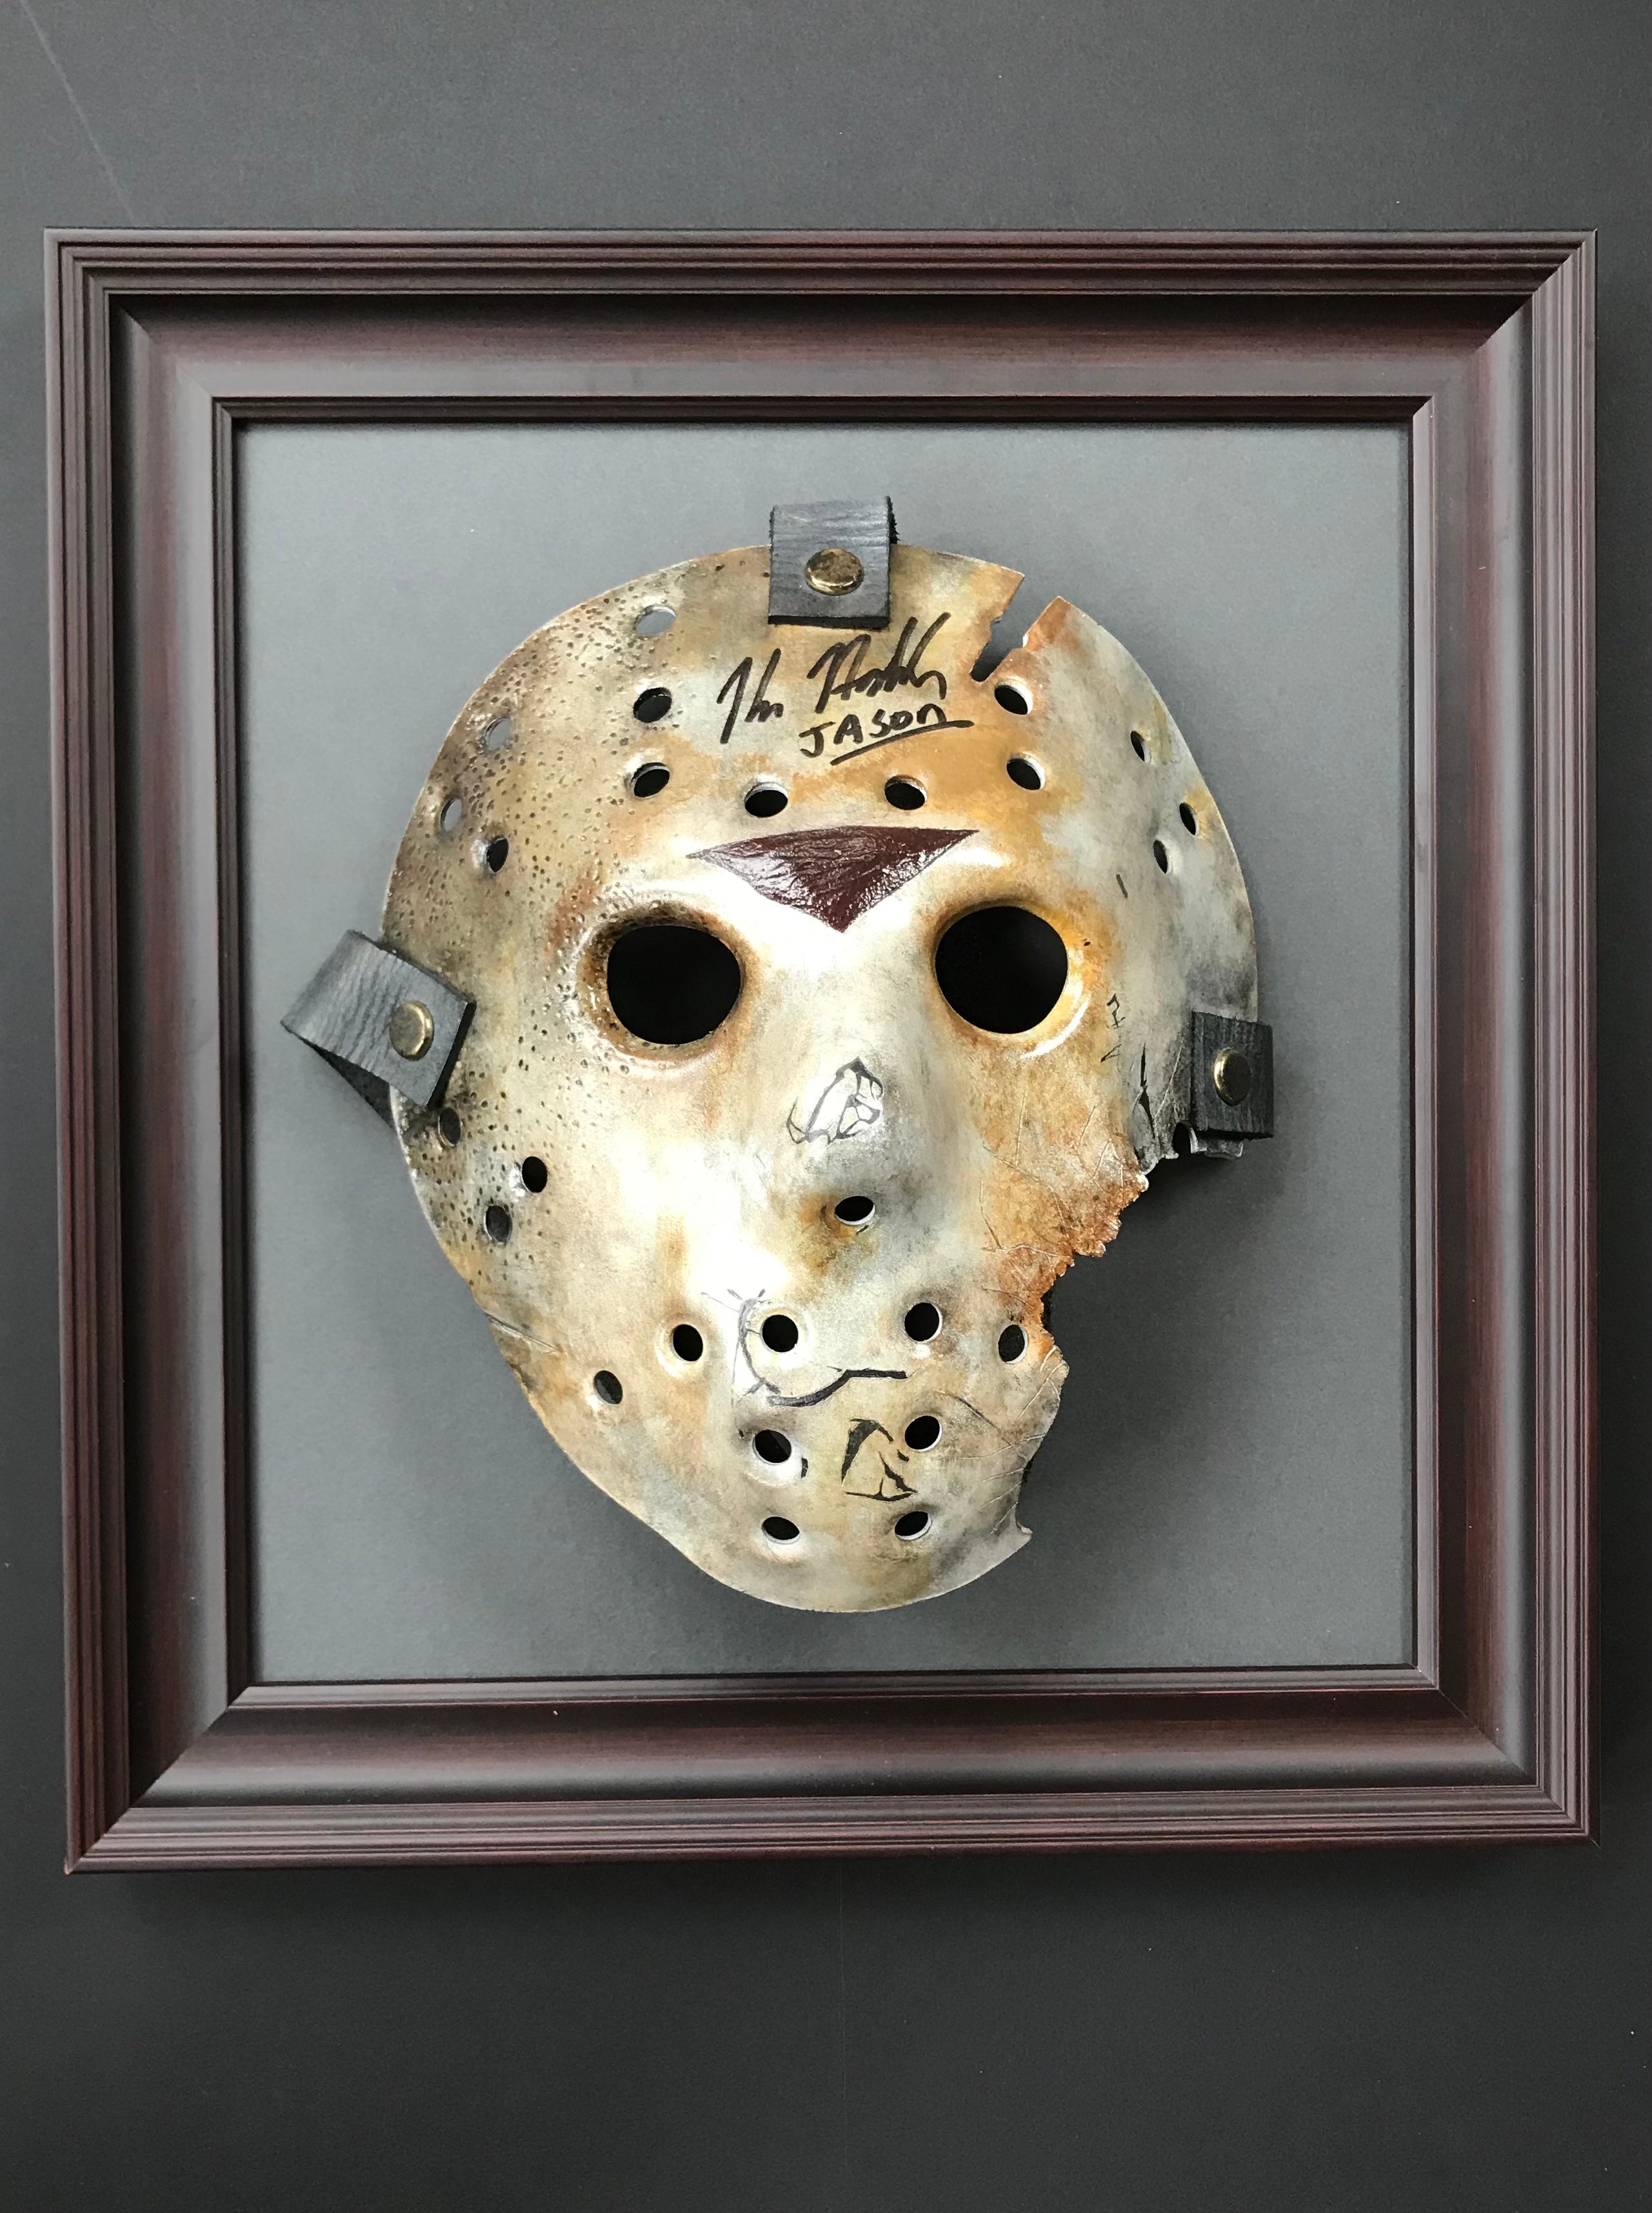 Friday 13th Part VII: The New Blood (1988) - A Signed Replica Hockey Mask